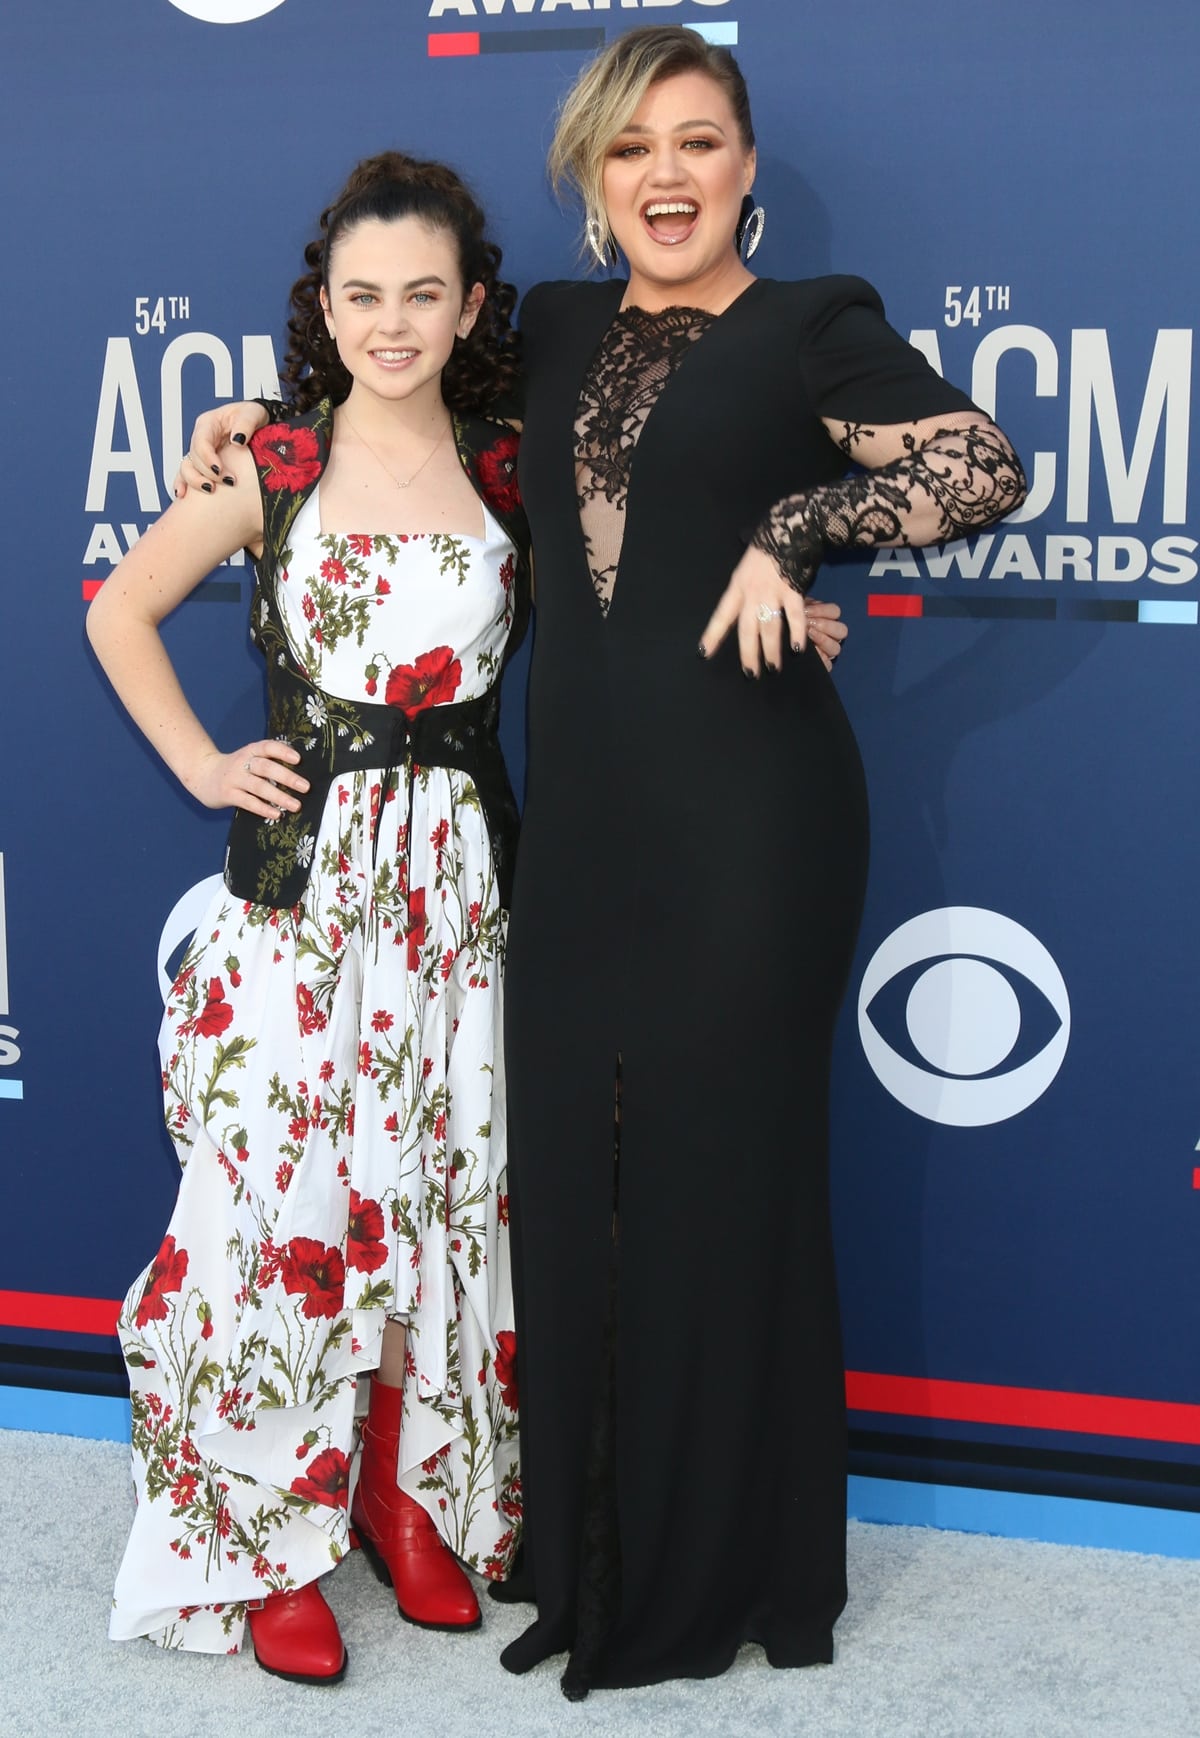 Kelly Clarkson in an Alexander McQueen dress, Yves Saint Laurent earrings, and Balmain shoes with The Voice winner Chevel Shepherd at the 2019 Academy of Country Music Awards